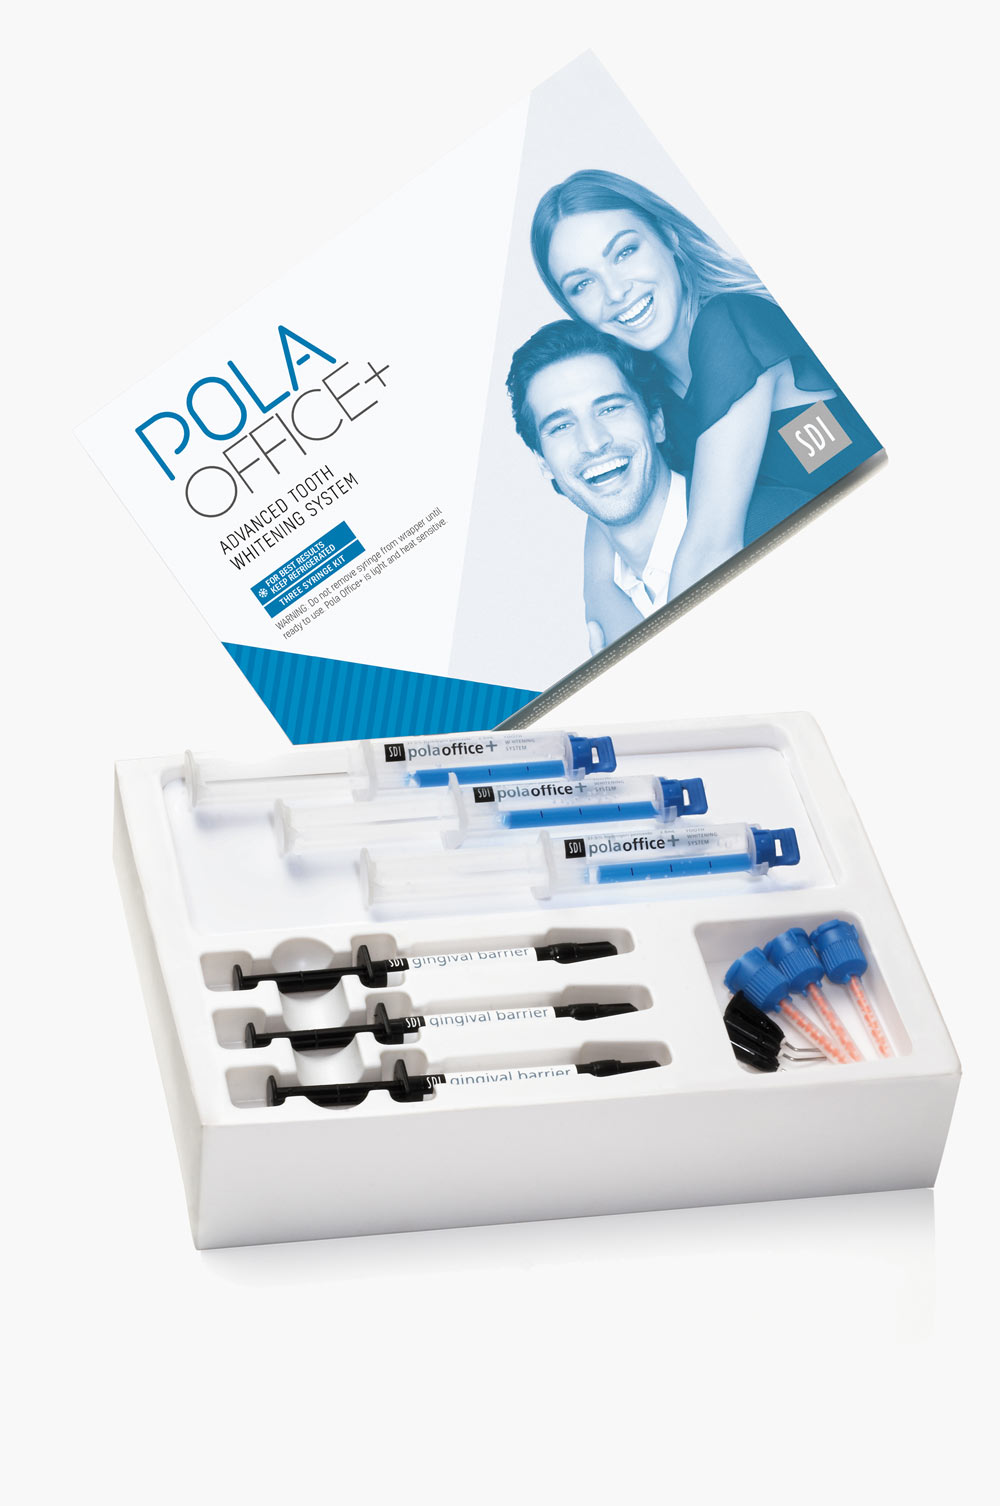 polaoffice+ advanced tooth whitening system